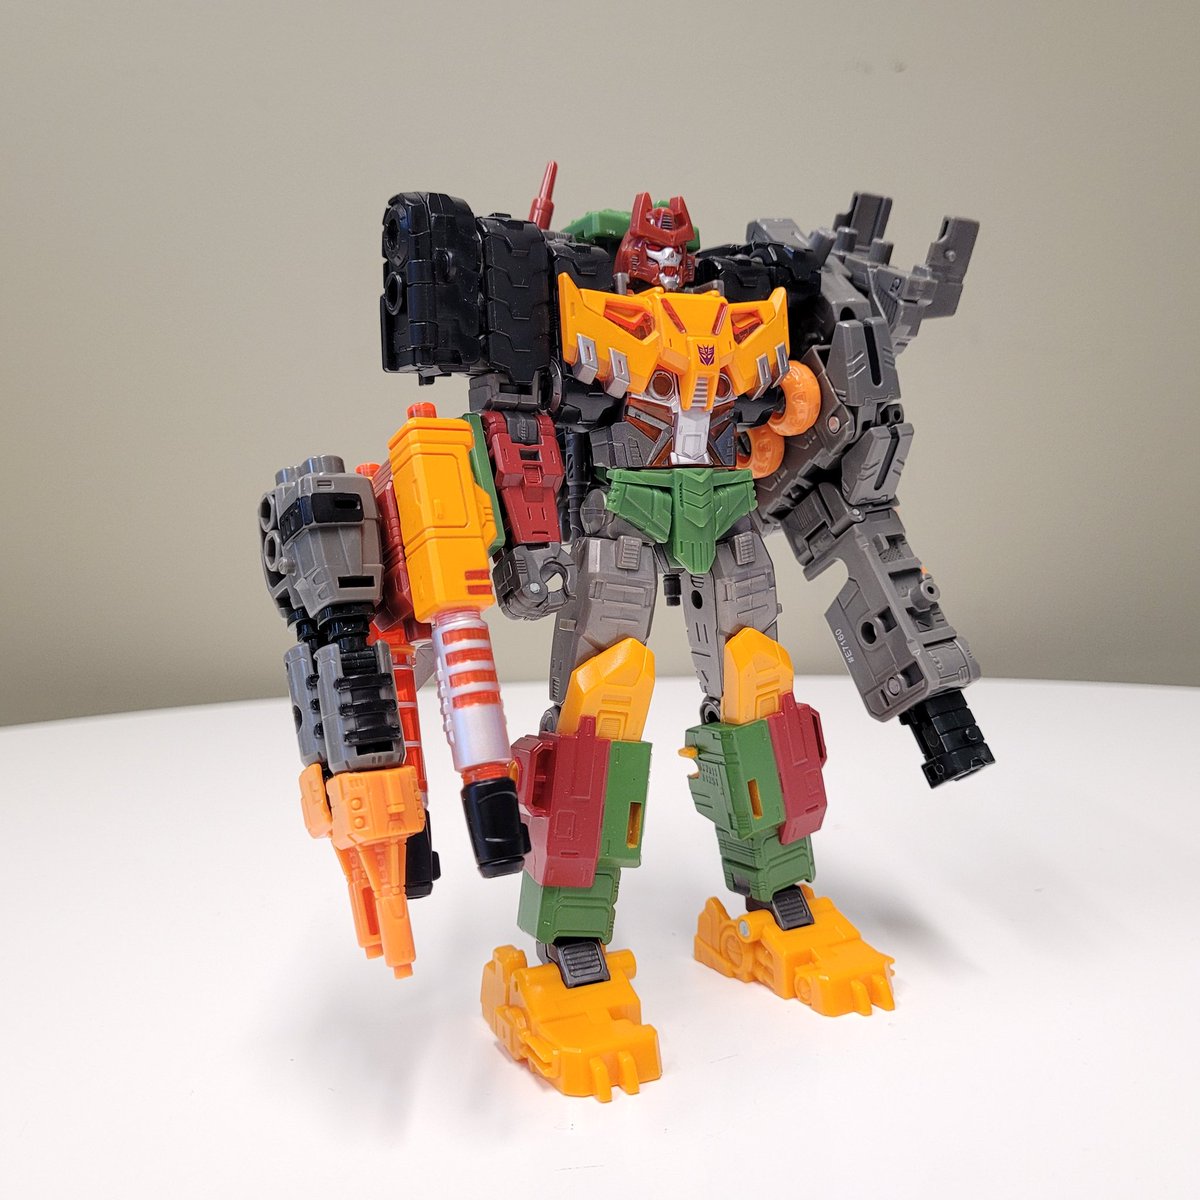 Fasttrack modulates Bludgeon. Took some inspiration from my Shard combiners (where she replaces an entire limb), applied it to this set of ingredients, and am pleased with the results 🫡 #transformers #transformerslegacy #transformersearthrise